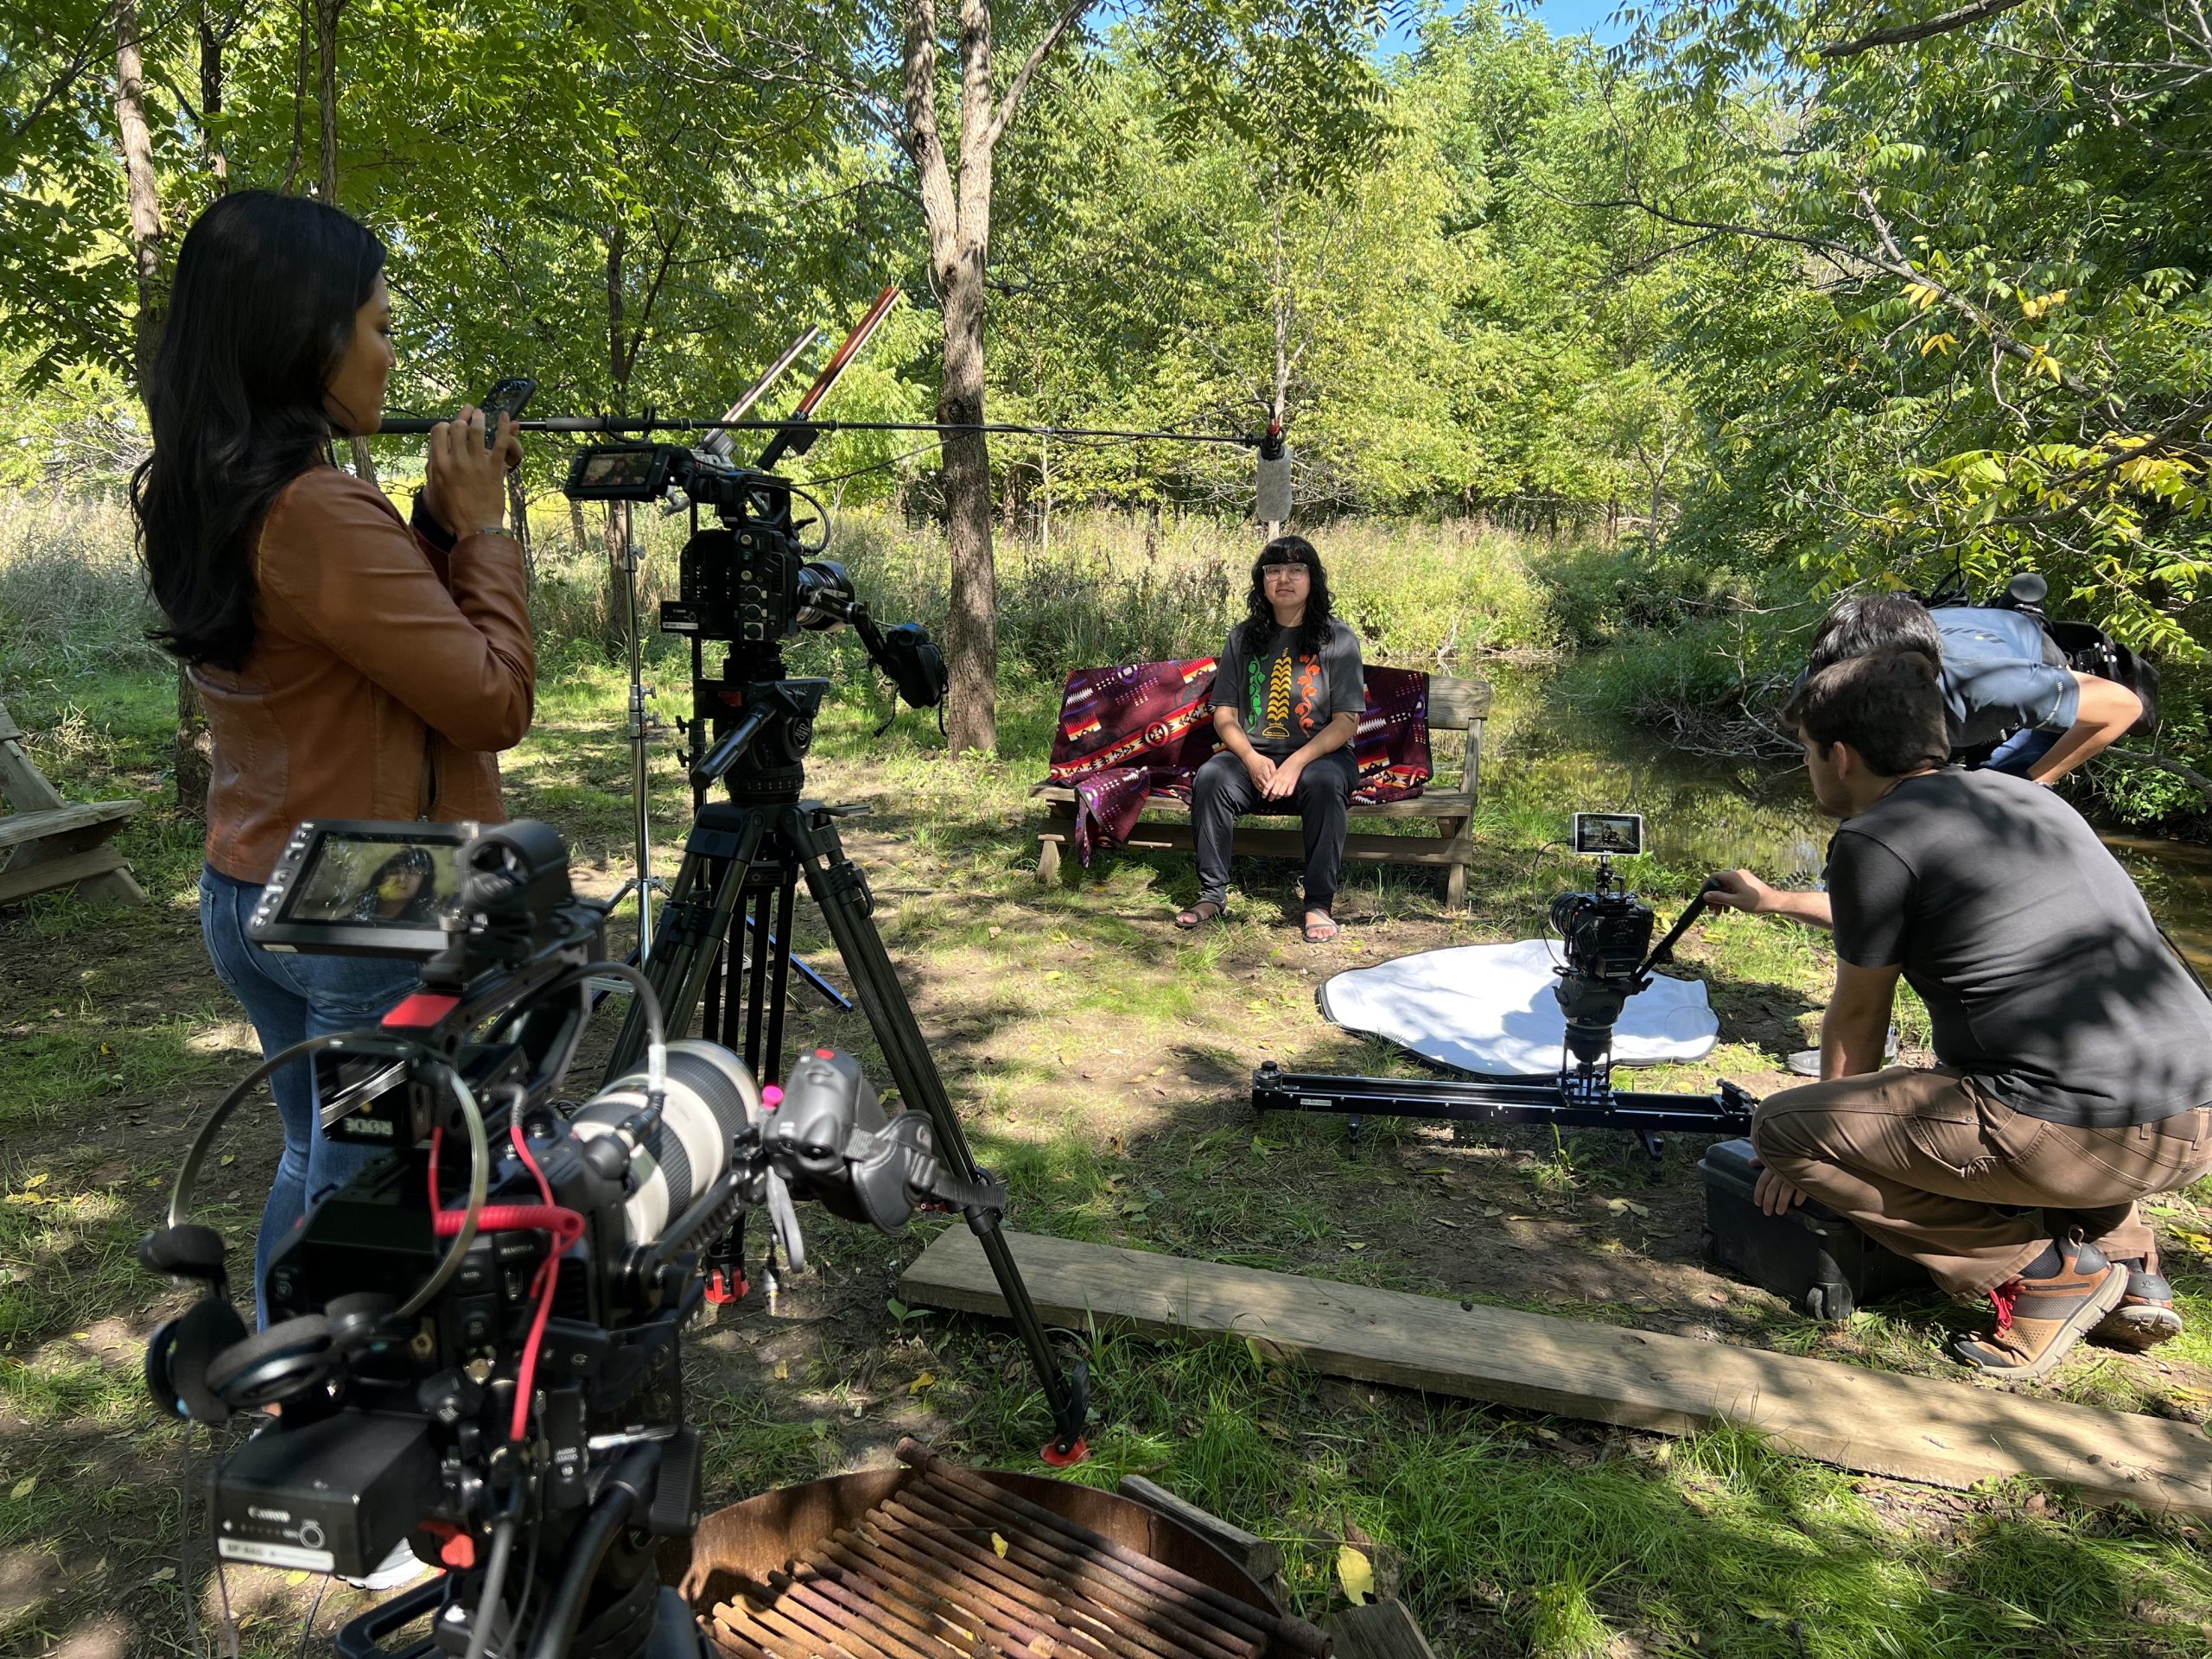 Our America: Reclaiming Turtle Island (BTS) - ABC Owned Television Stations